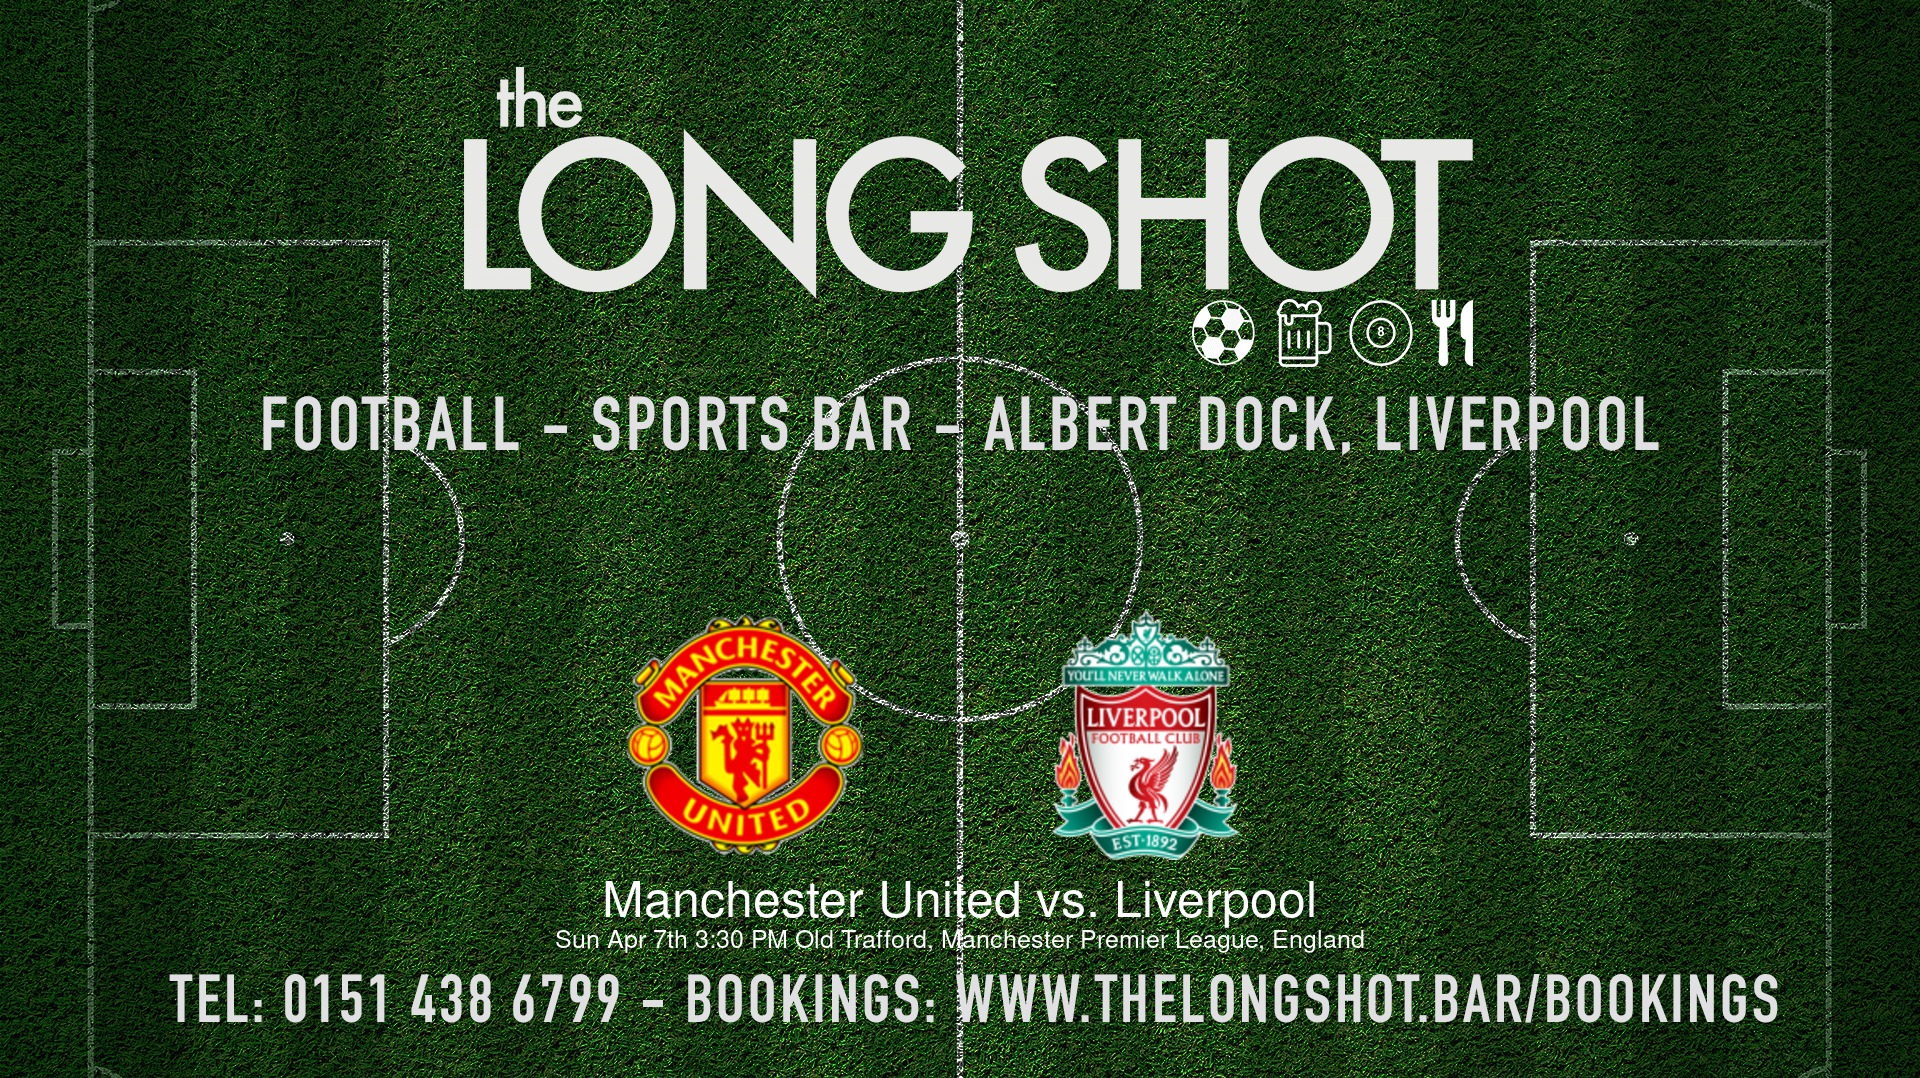 Event image - Manchester United vs. Liverpool